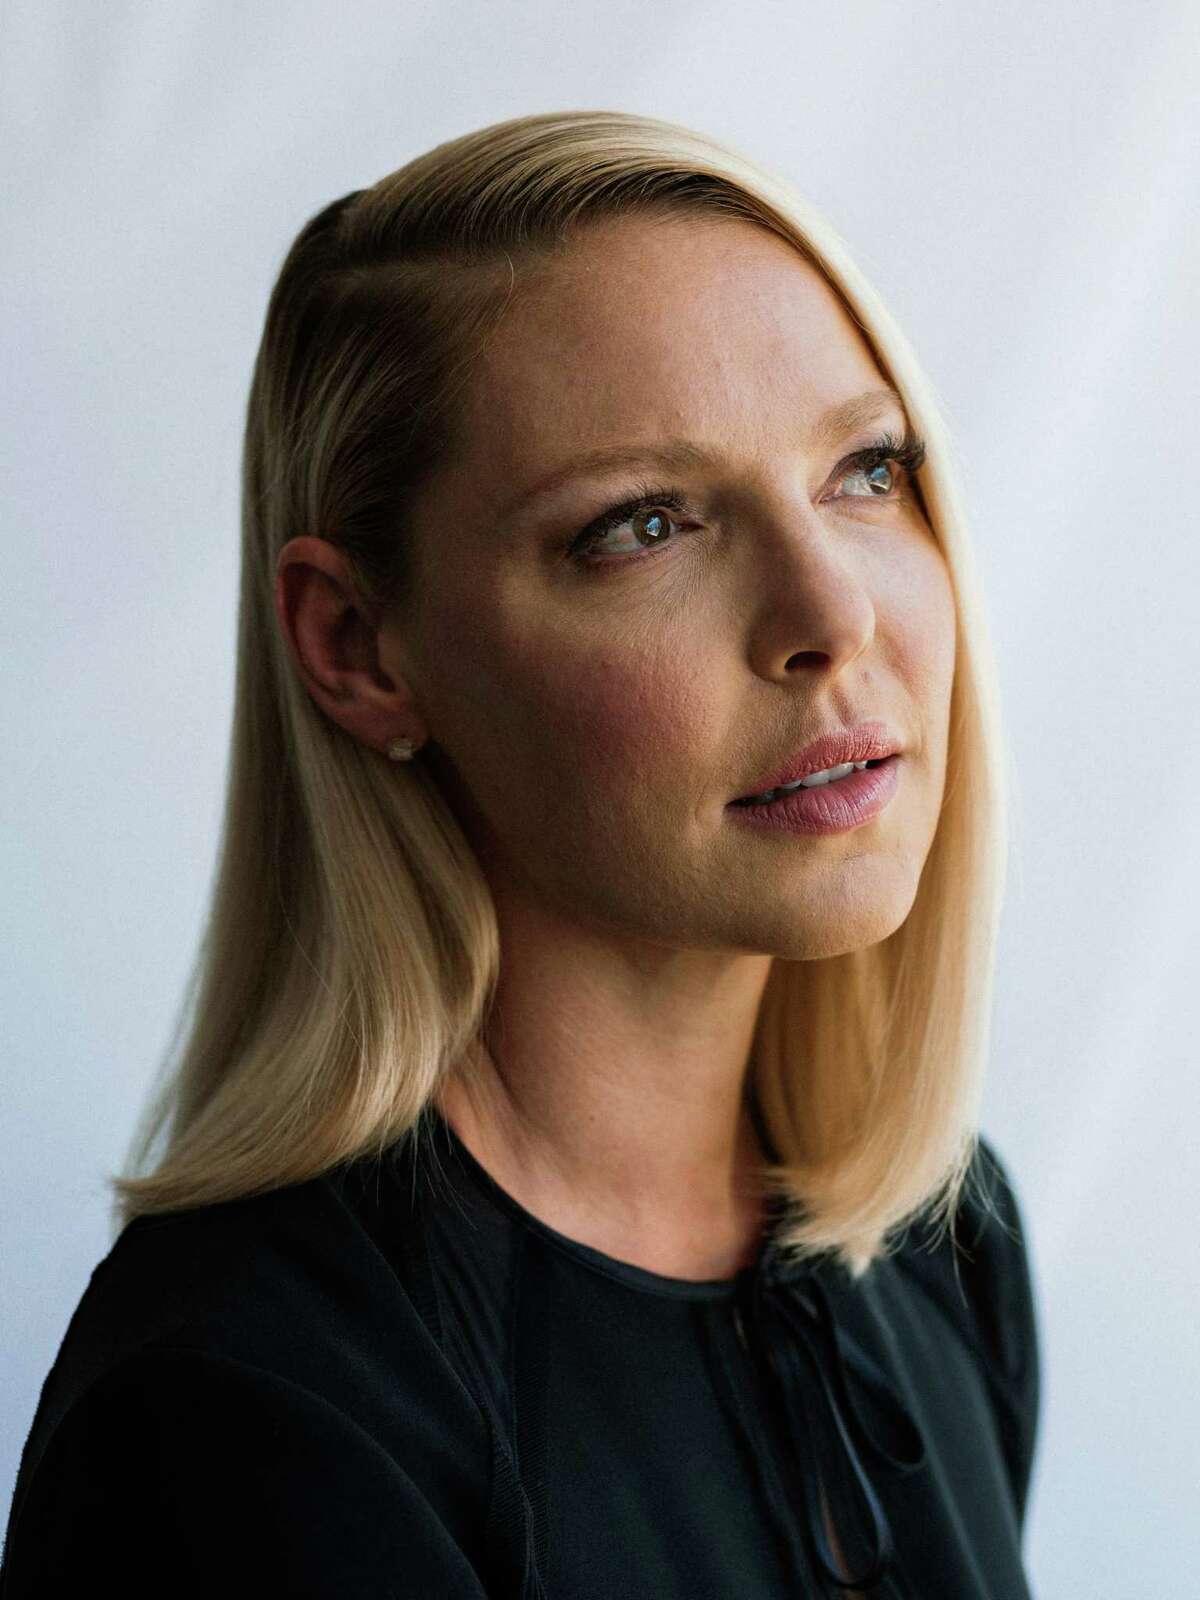 Katherine Heigl, who will join the cast in season eight of the television show "Suits," in Toronto, July 6, 2018. With two of its main characters gone, the eighth season of "Suits" reinvents itself with both new and familiar faces. (Mark Sommerfeld/The New York Times)